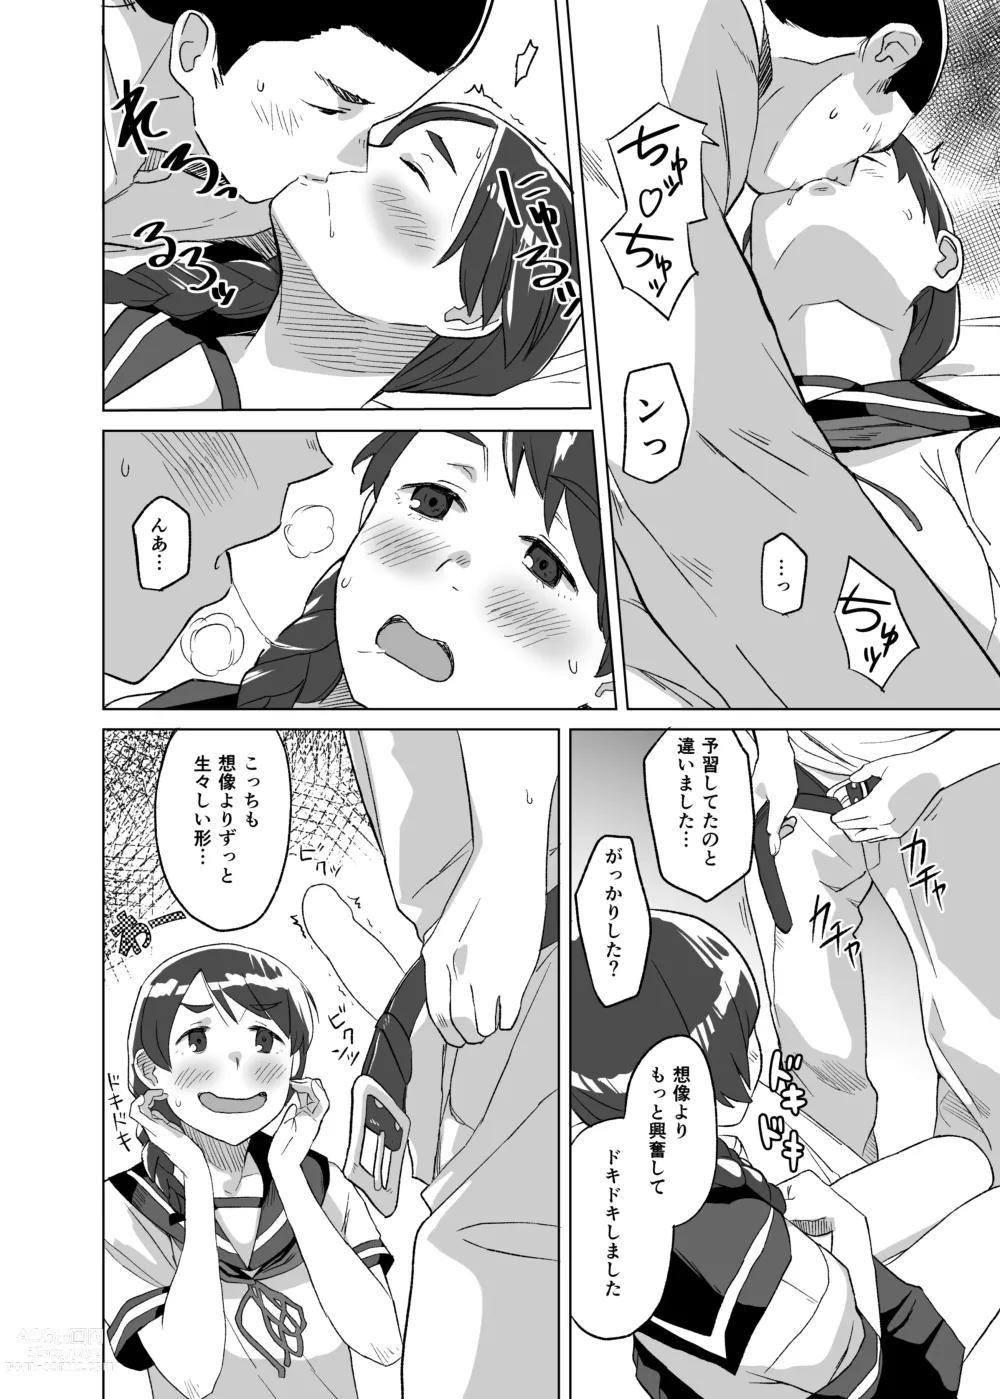 Page 7 of doujinshi Ding Dong